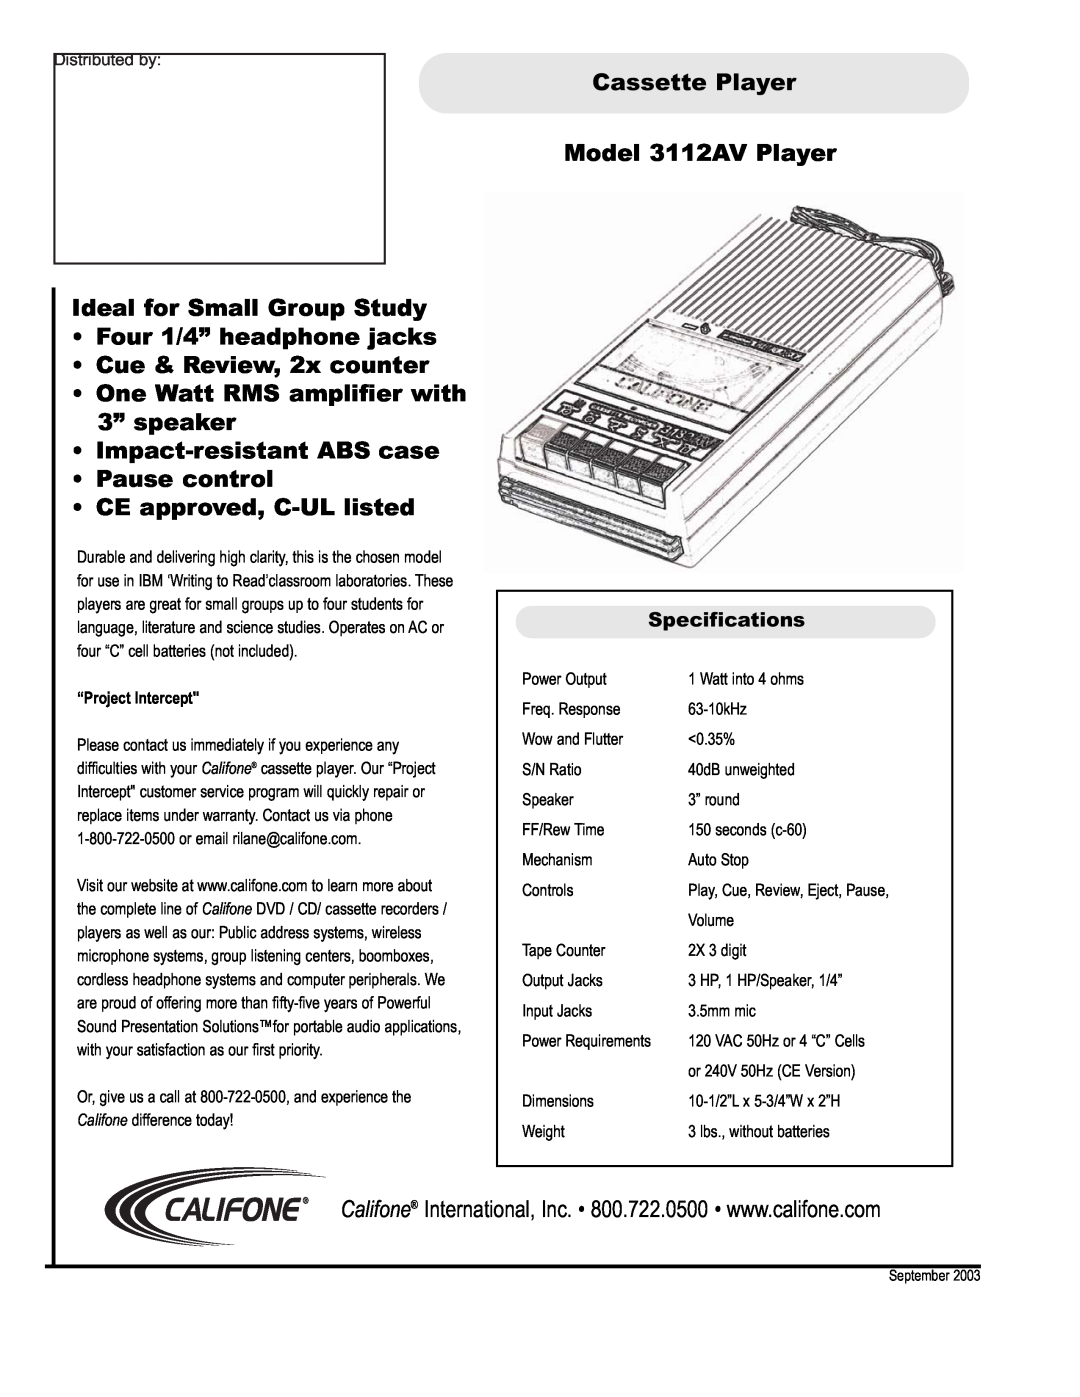 Califone 3112AV warranty Ideal for Small Group Study, Four 1/4” headphone jacks, Cue & Review, 2x counter, Specifications 